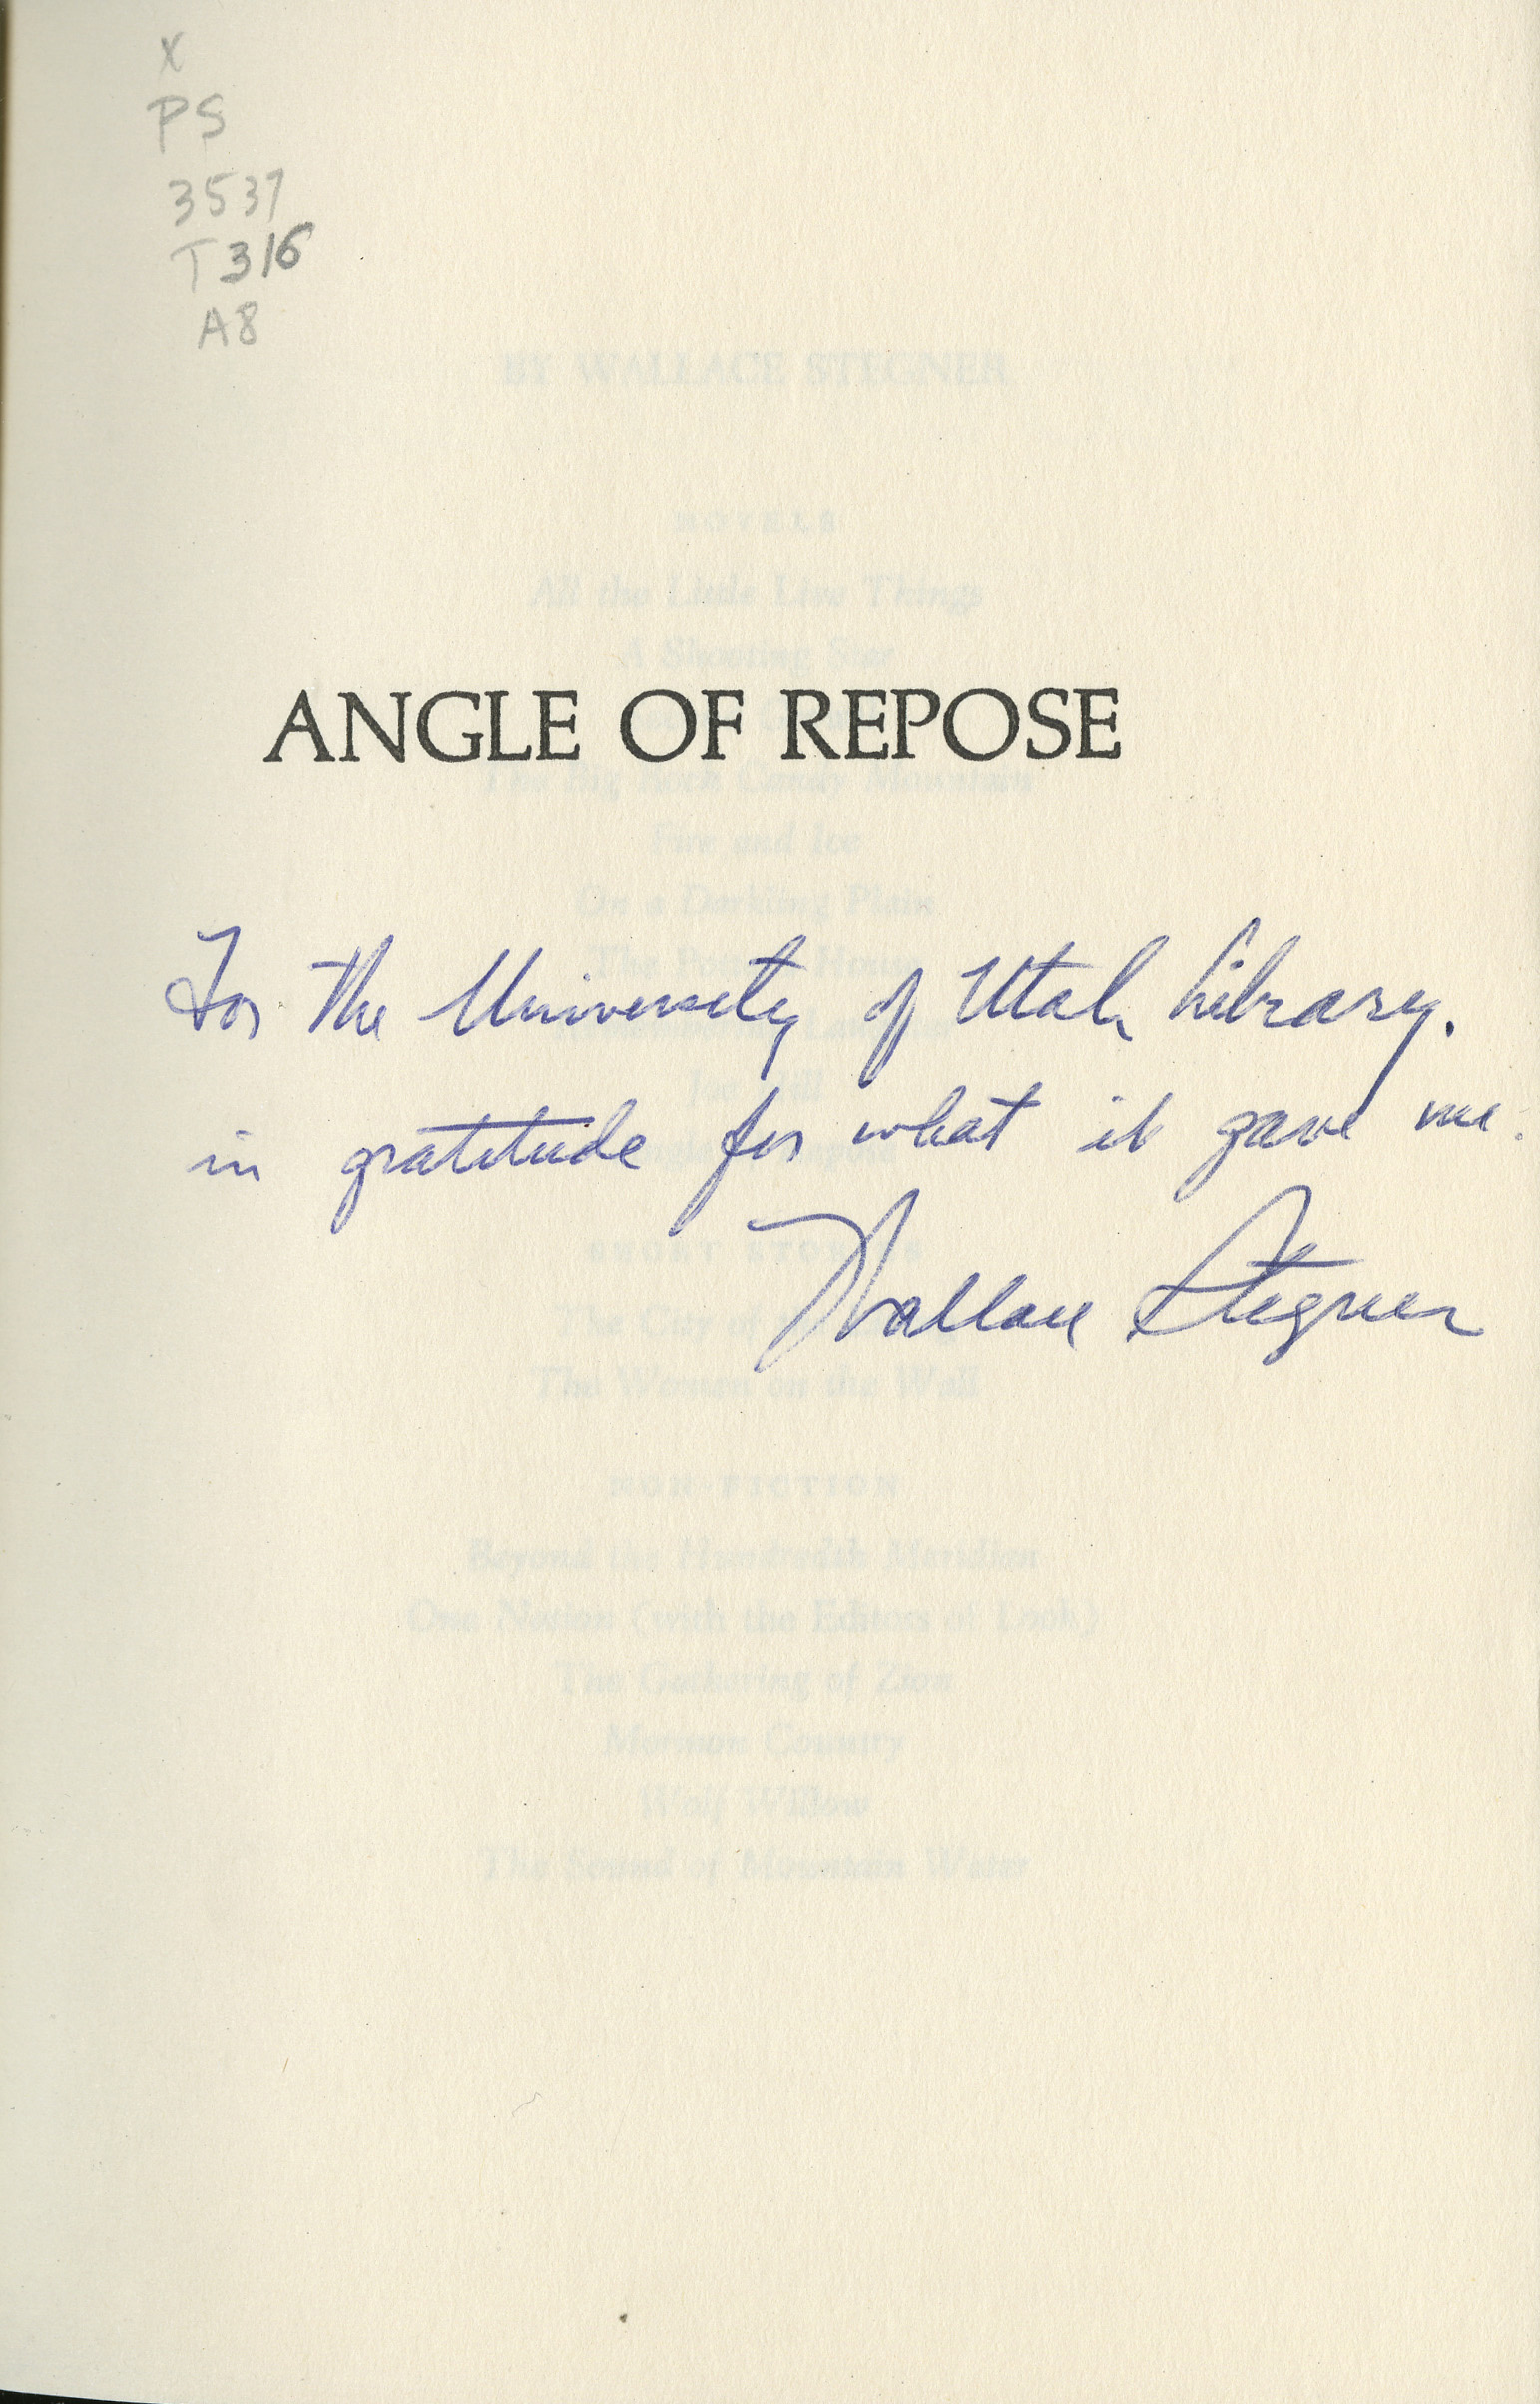 The title page of Angle of Repose, dedicated to the Marriott Library and signed by Wallace Stegner